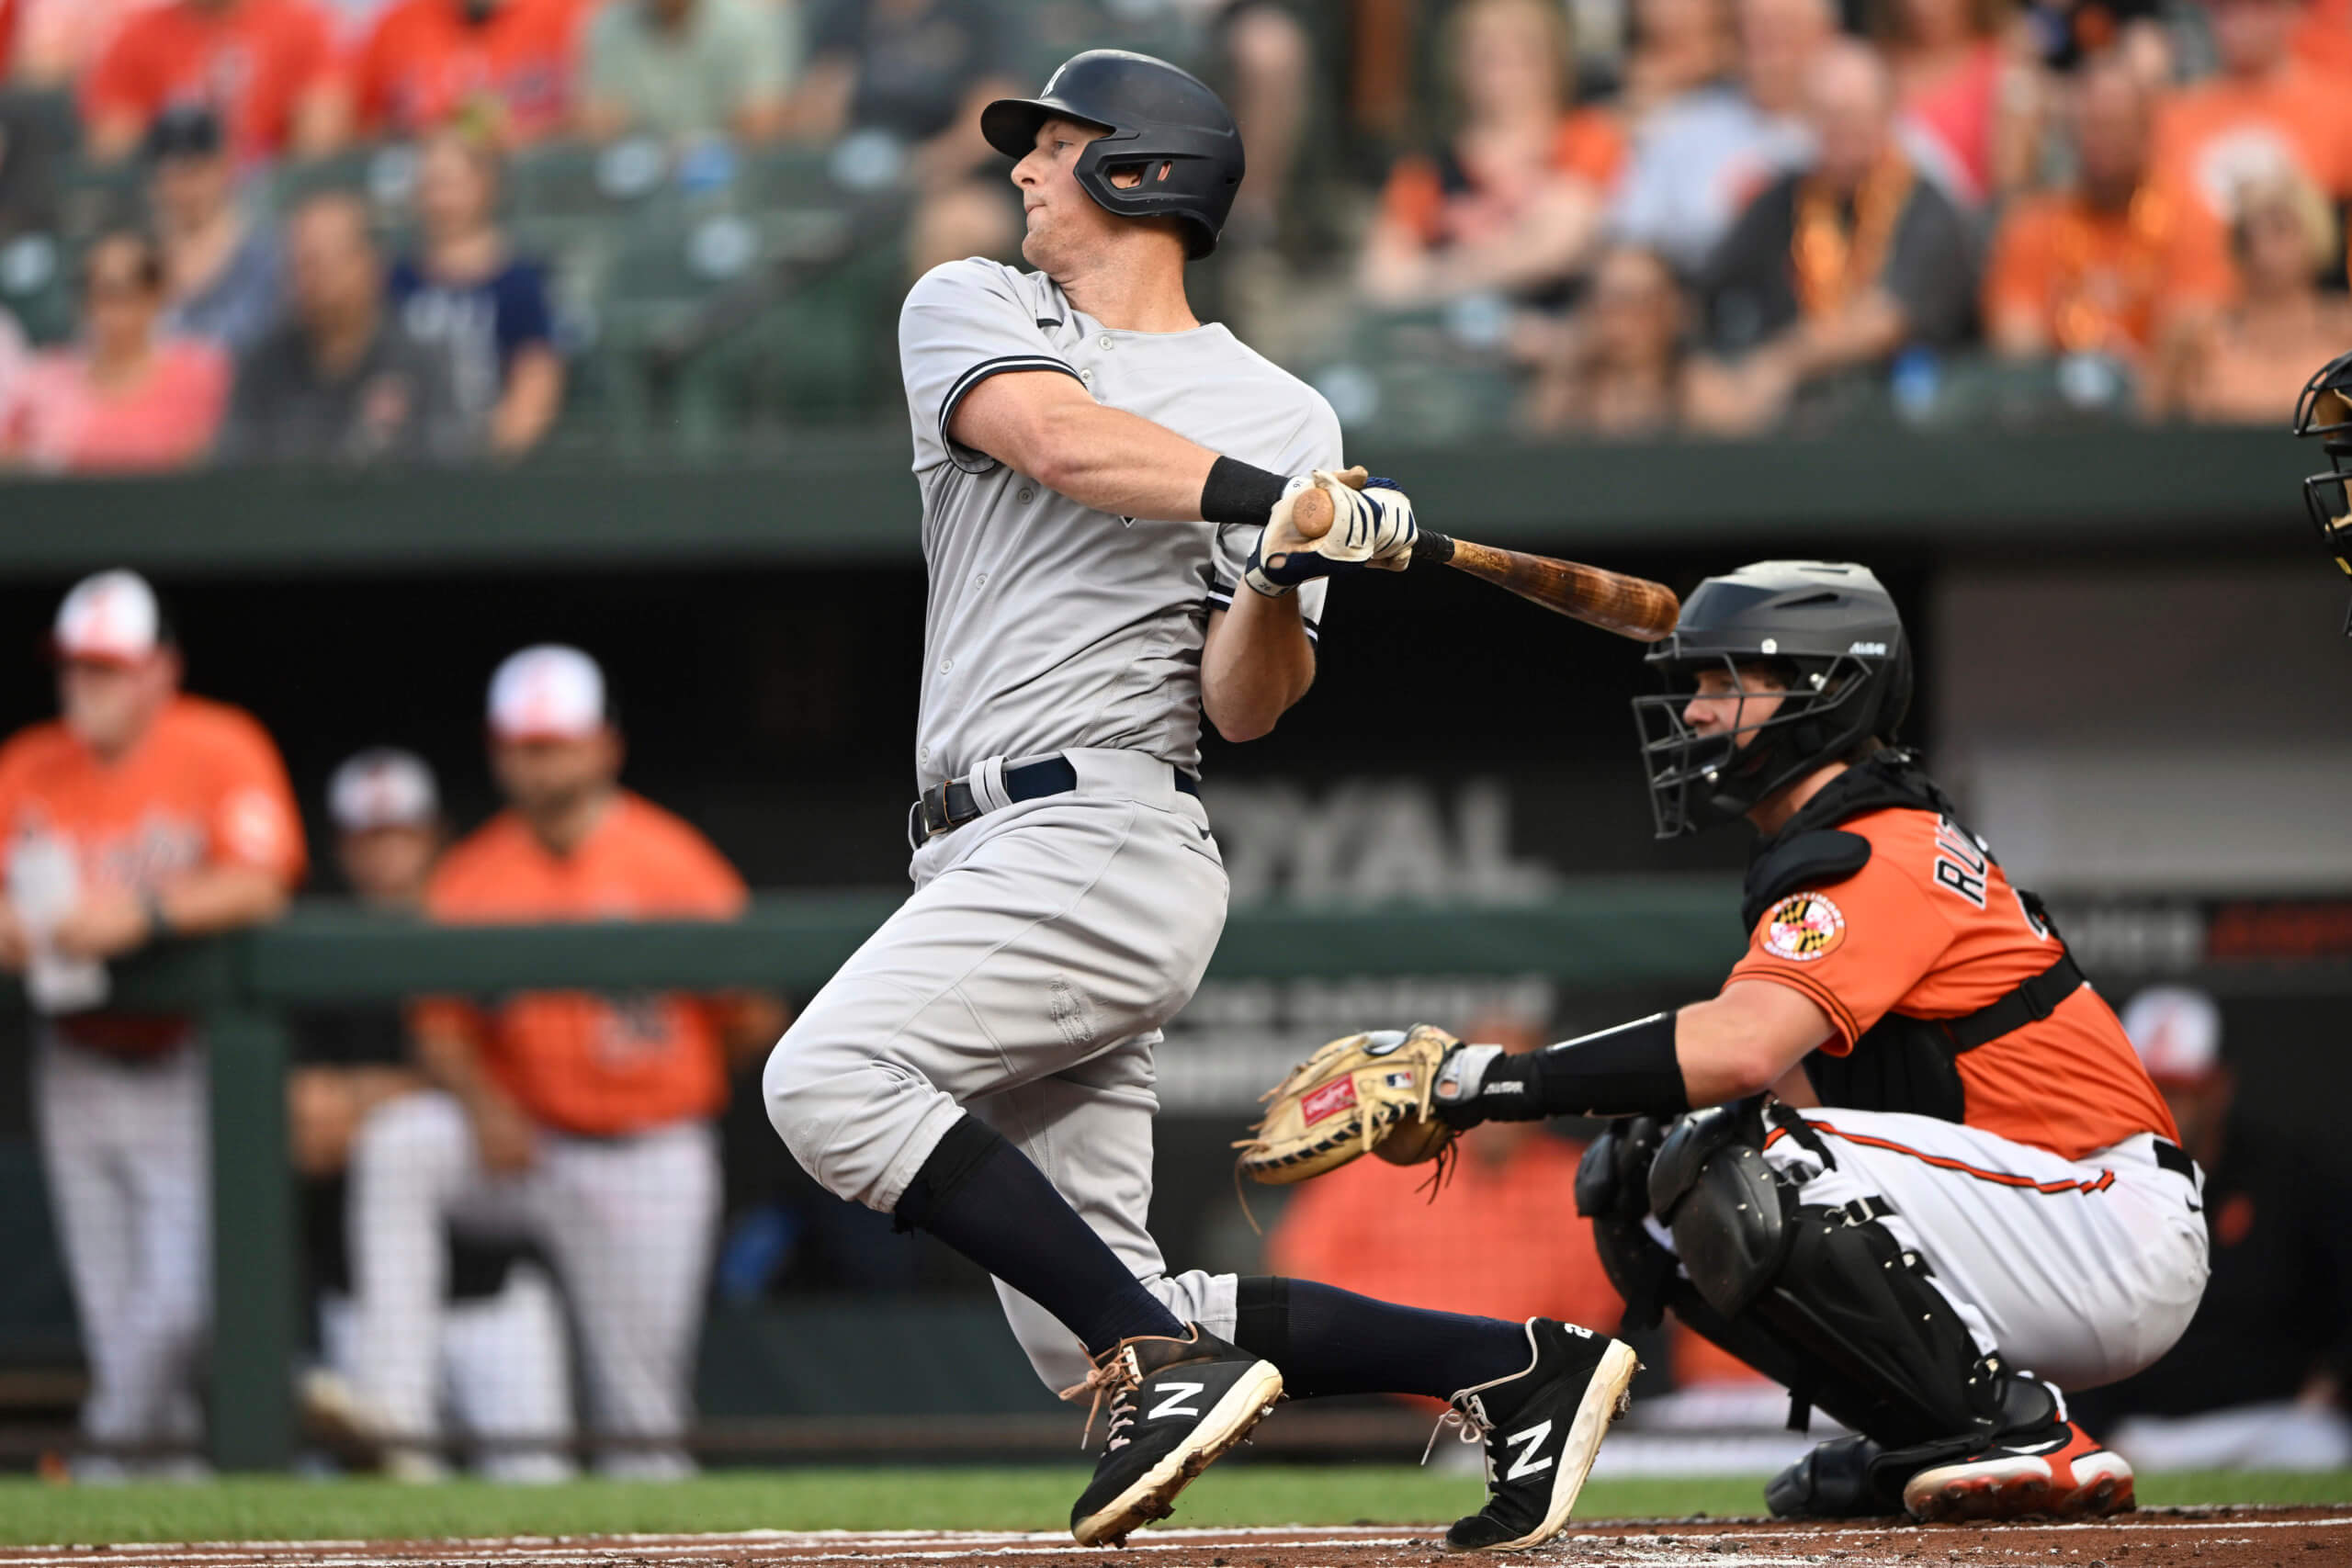 DJ LeMahieu's Yankees return in doubt after latest injury update